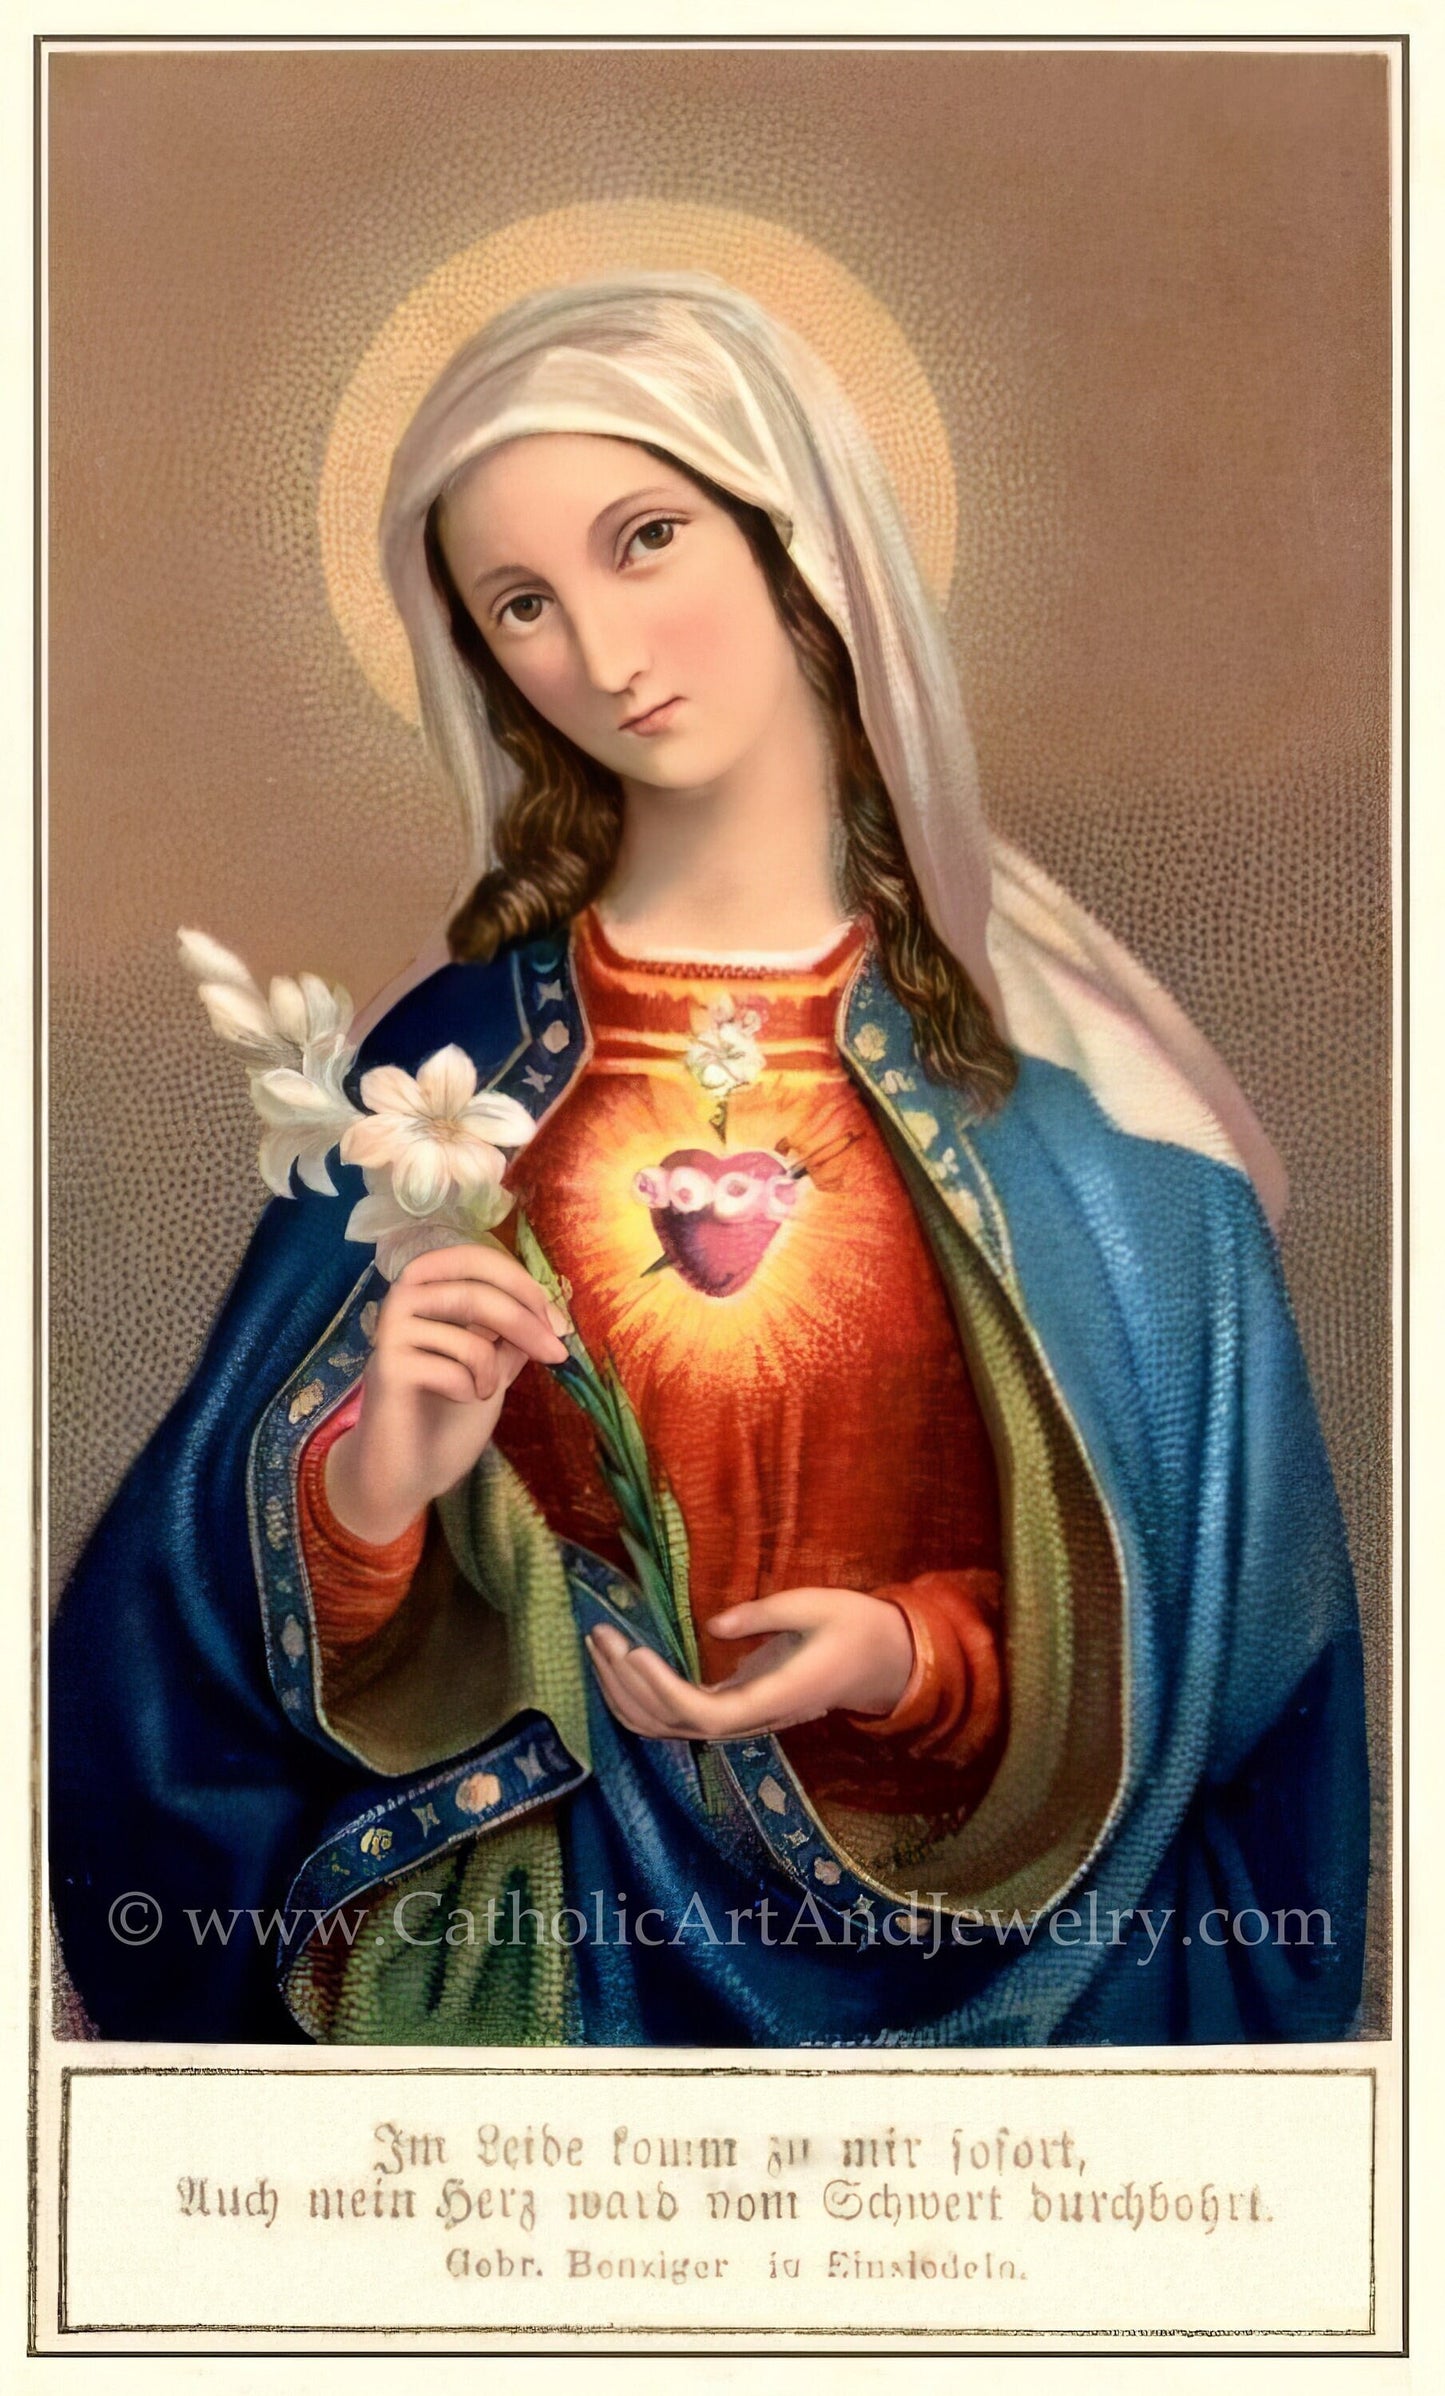 Immaculate Heart of Mary – Benziger – based on a Vintage Holy Card – Catholic Art Print – Archival Quality